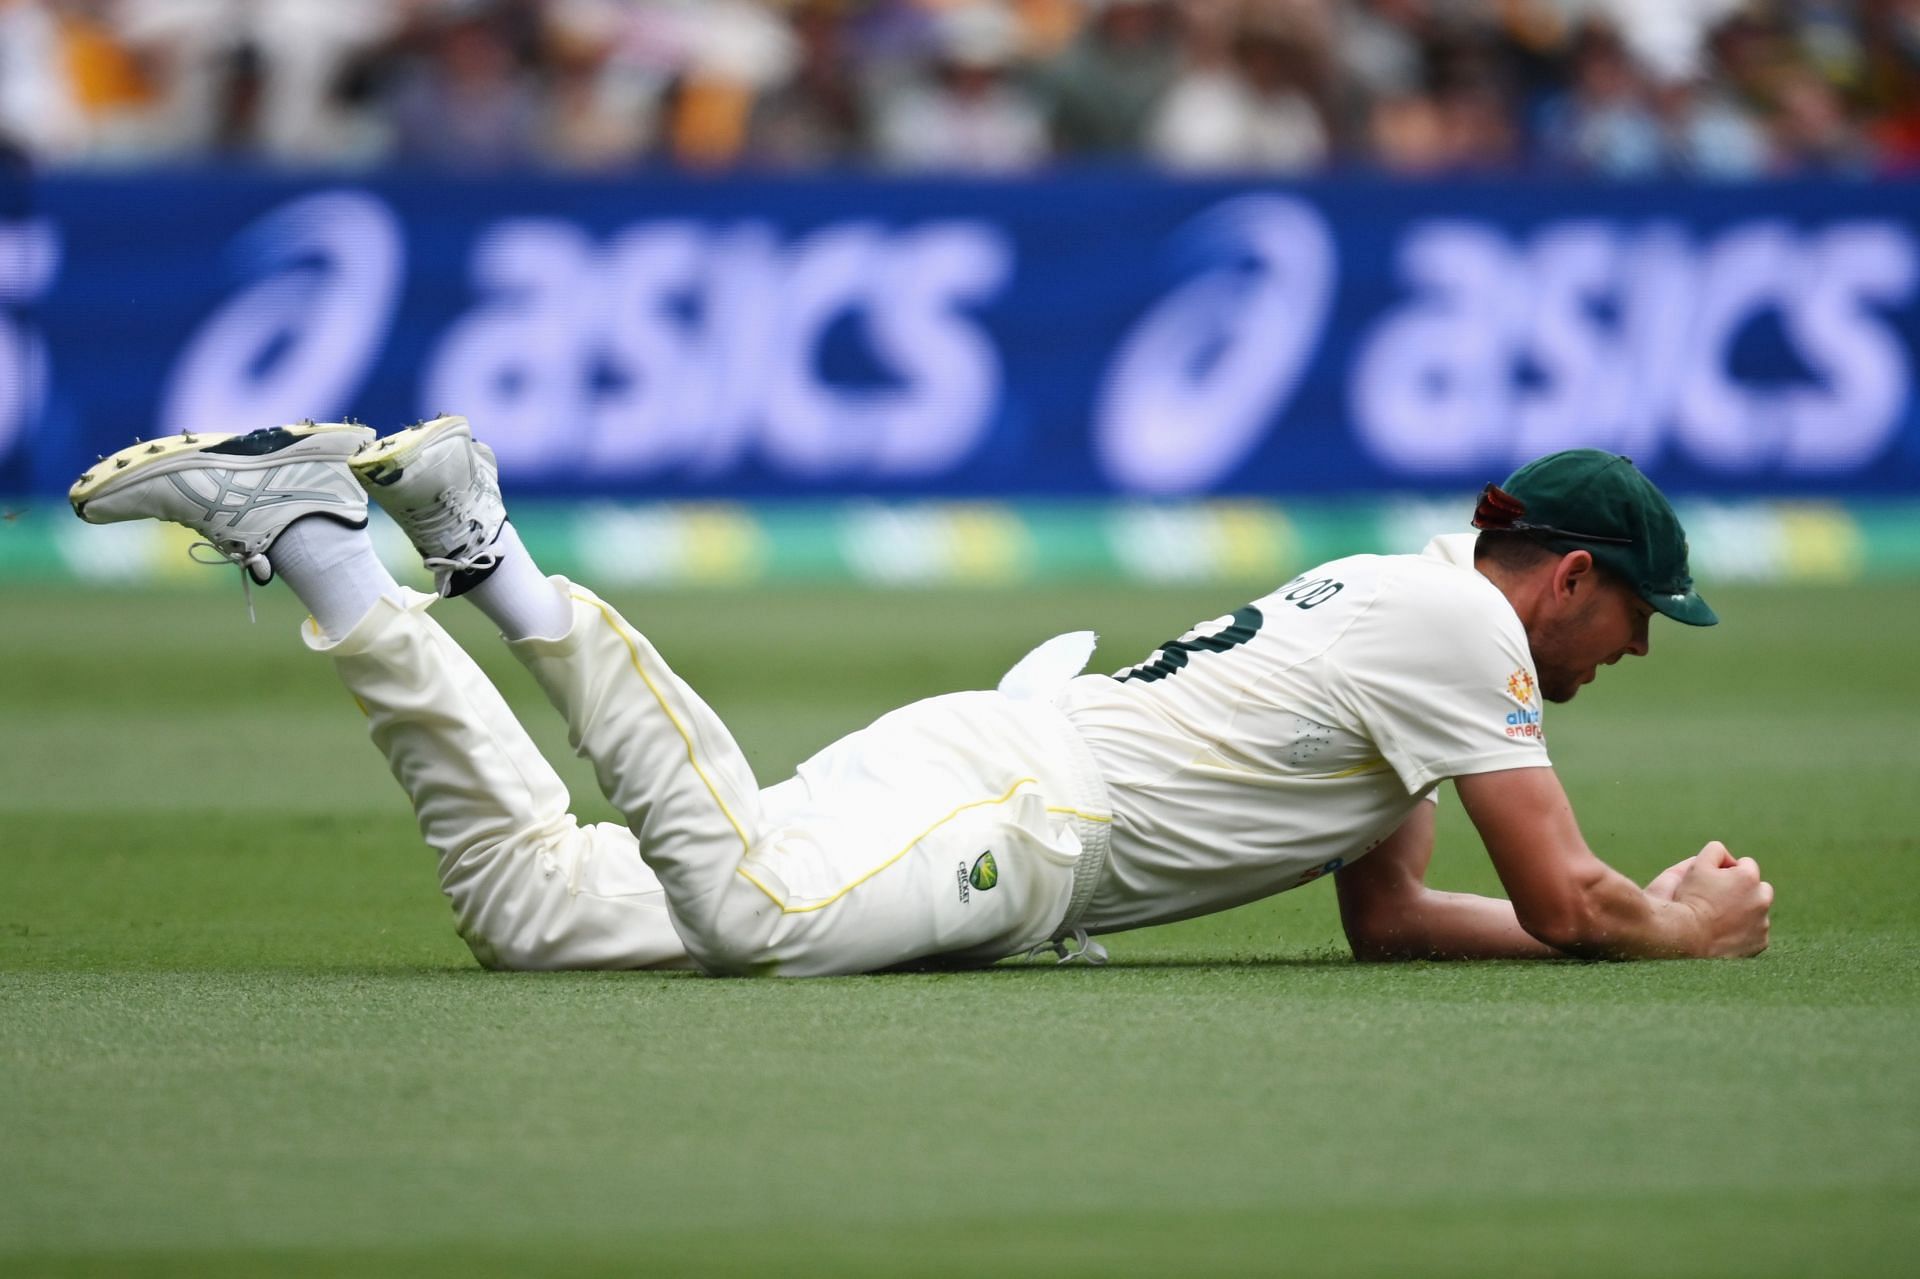 Ashes 2021-22: Josh Hazlewood took a brilliant catch to send Ollie Pope packing.